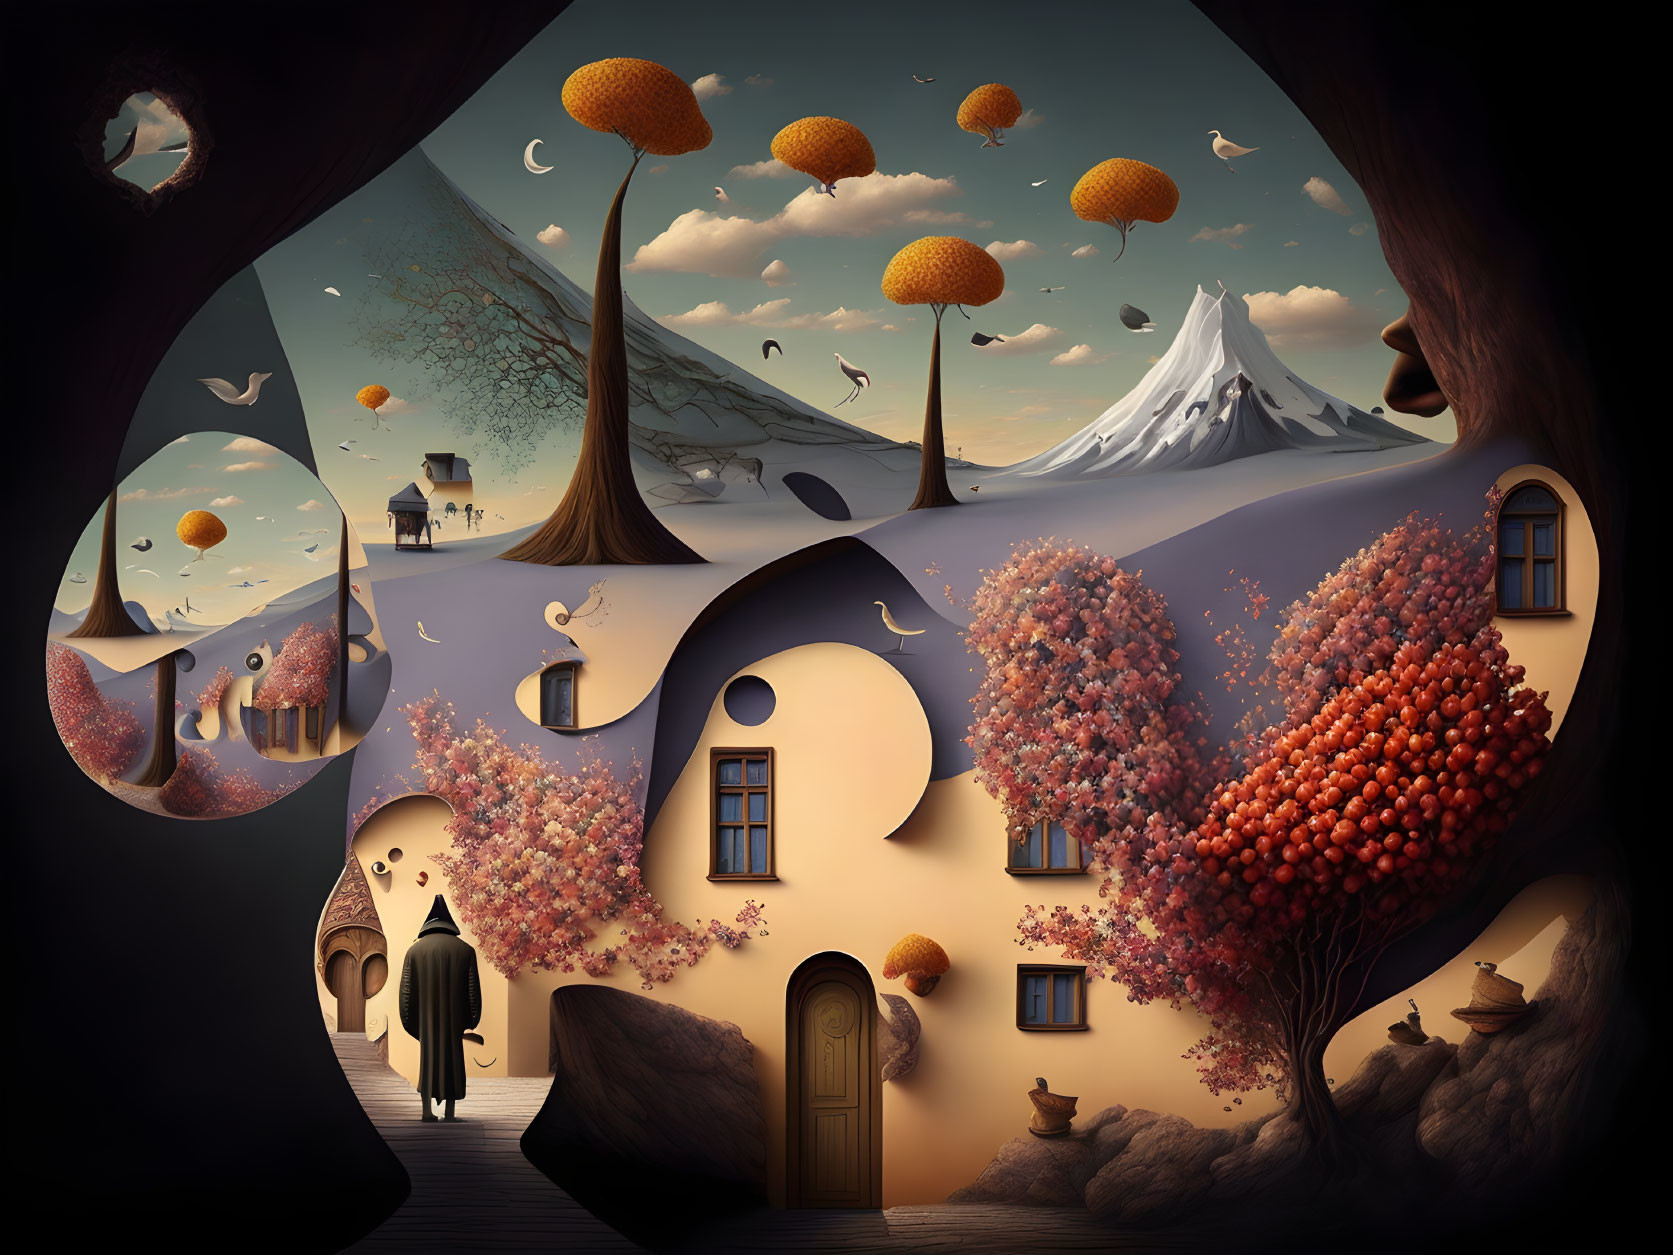 Whimsical surreal landscape with floating islands and figure walking towards door